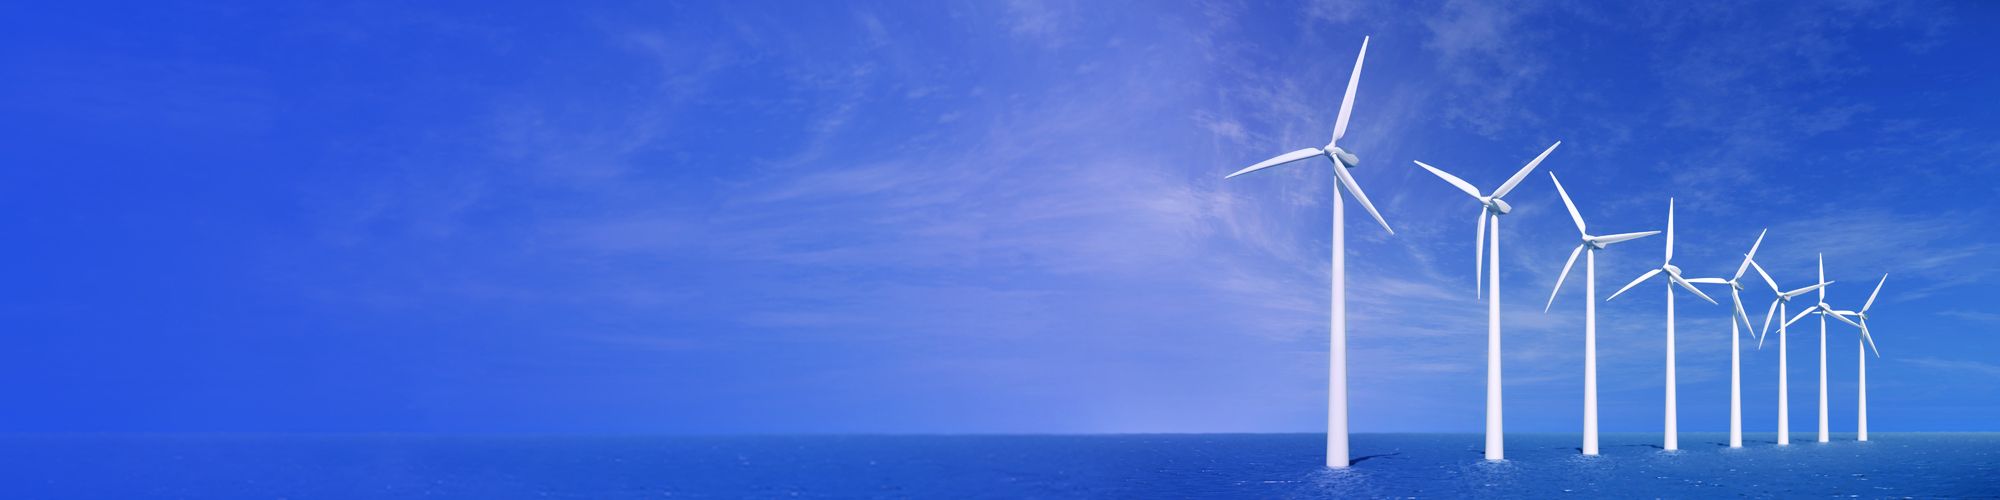 White wind mill in sea against clear blue sky